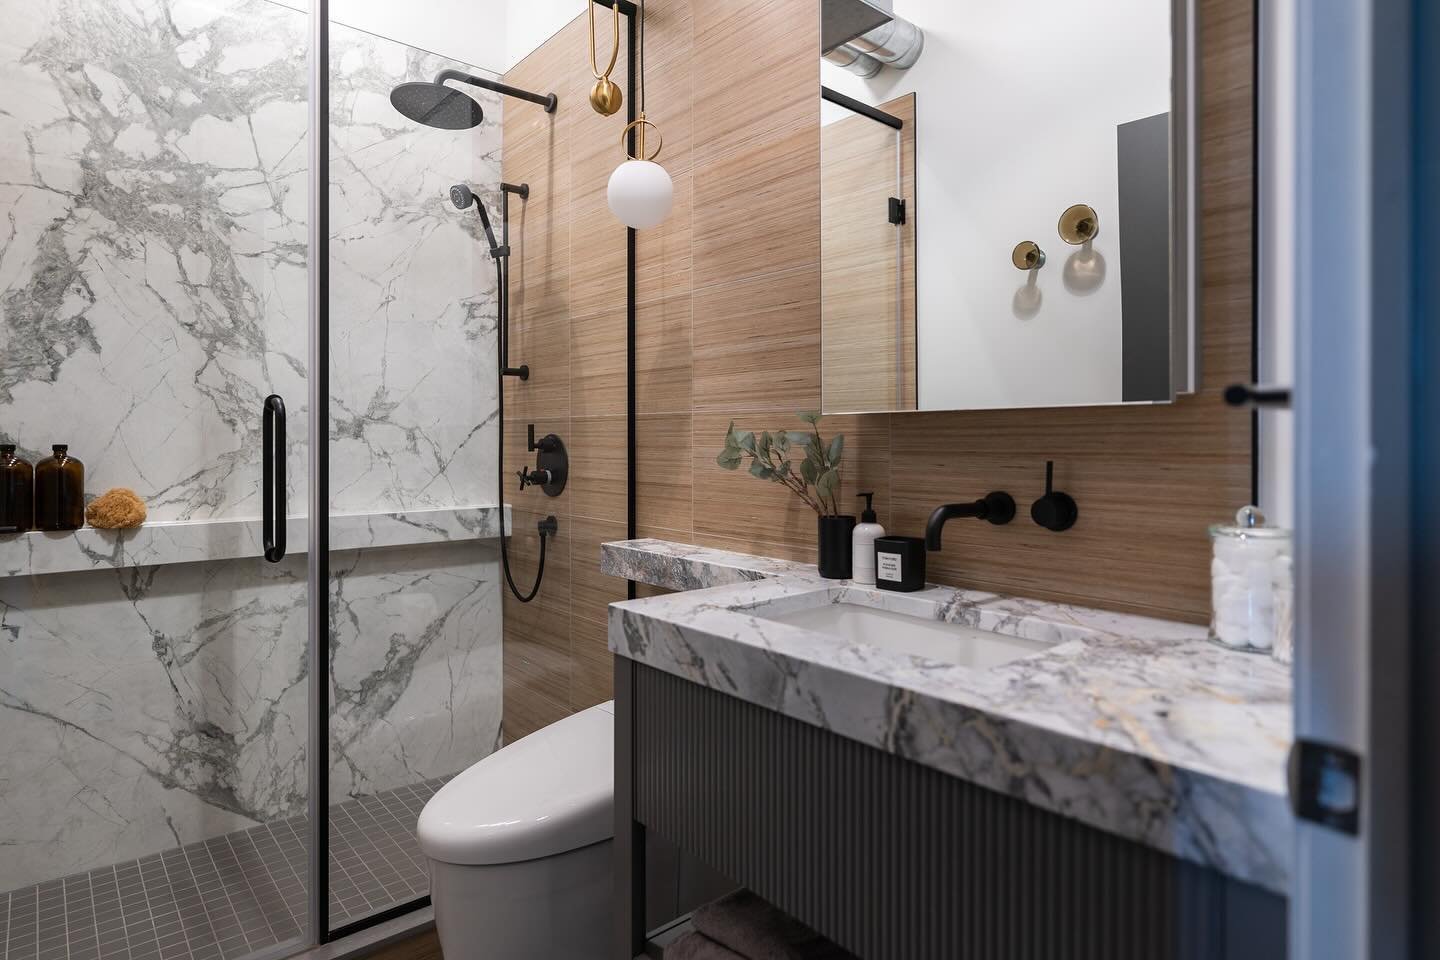 Edgy AF. 
For those who dare to stand out.

Swipe for the before &amp; after. 

Designed by: @debra_salmoni 
.
.
.
#InteriorDesign #DesignInspiration #bathroomdesign #bathroomremodel #homerenovation #luxuryinteriors #beforeandafter #moderndesign